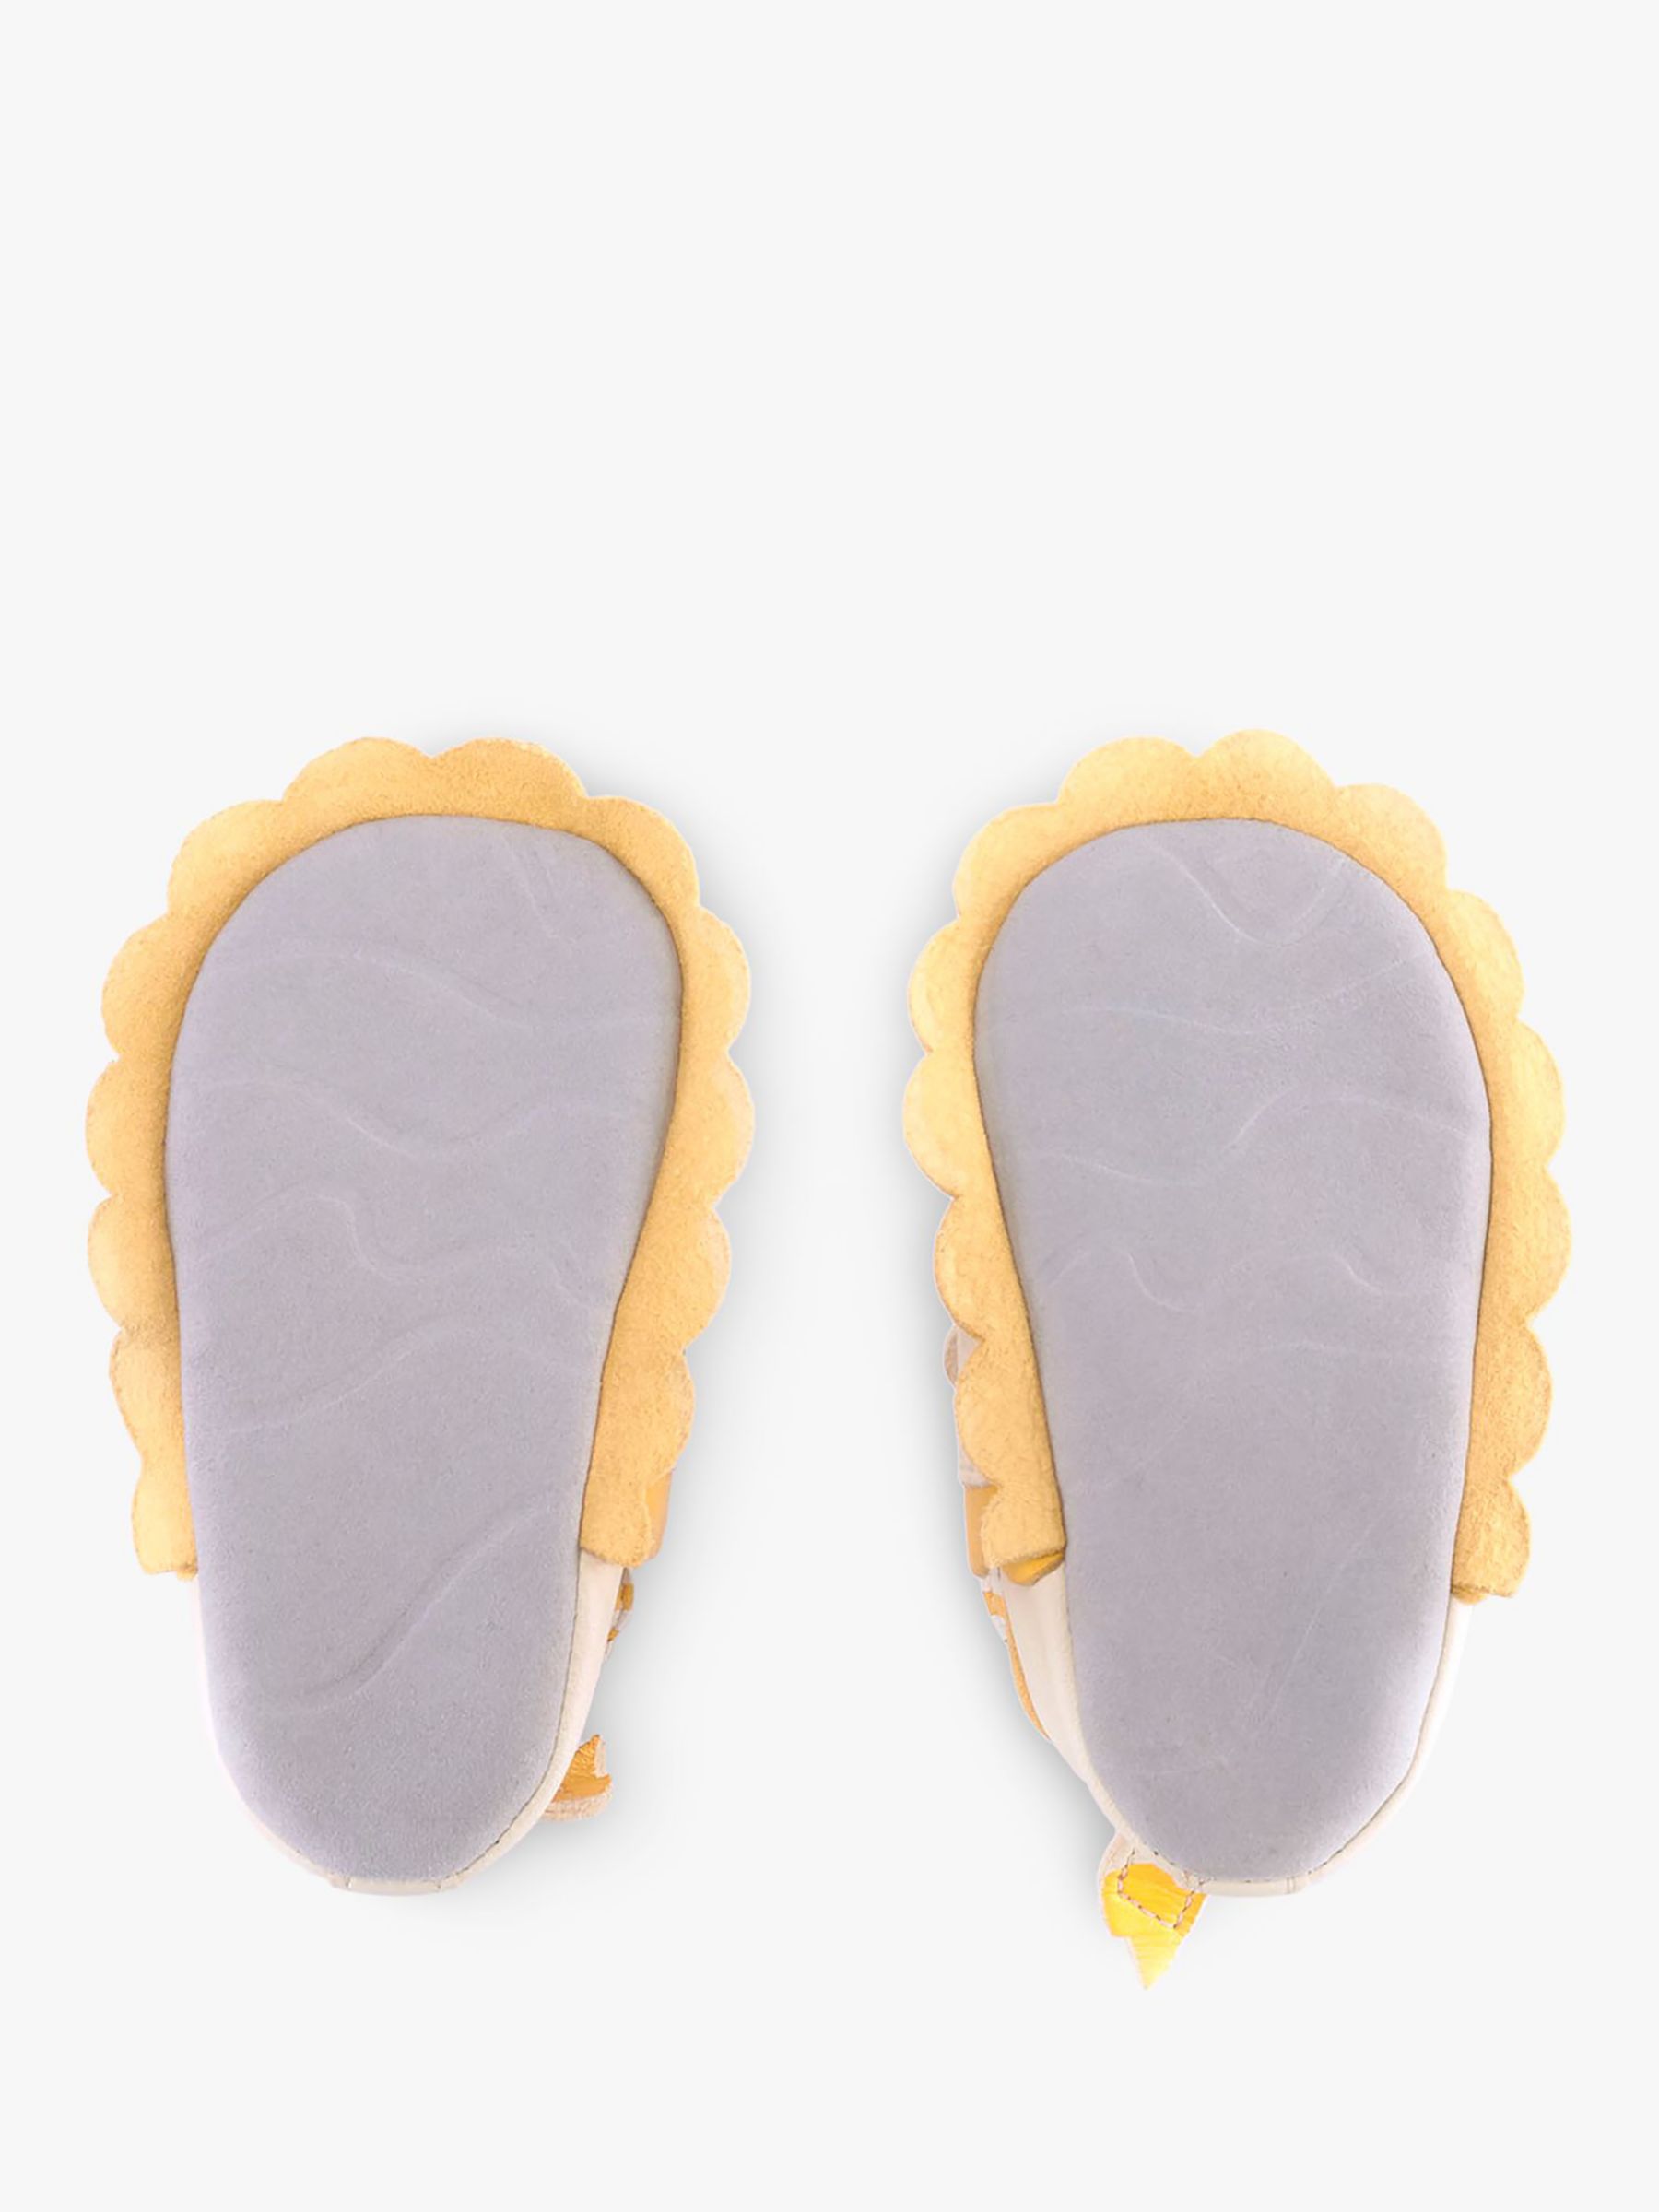 Start-Rite Kids' Fable Shoes, Cream/Yellow, 0-3 months